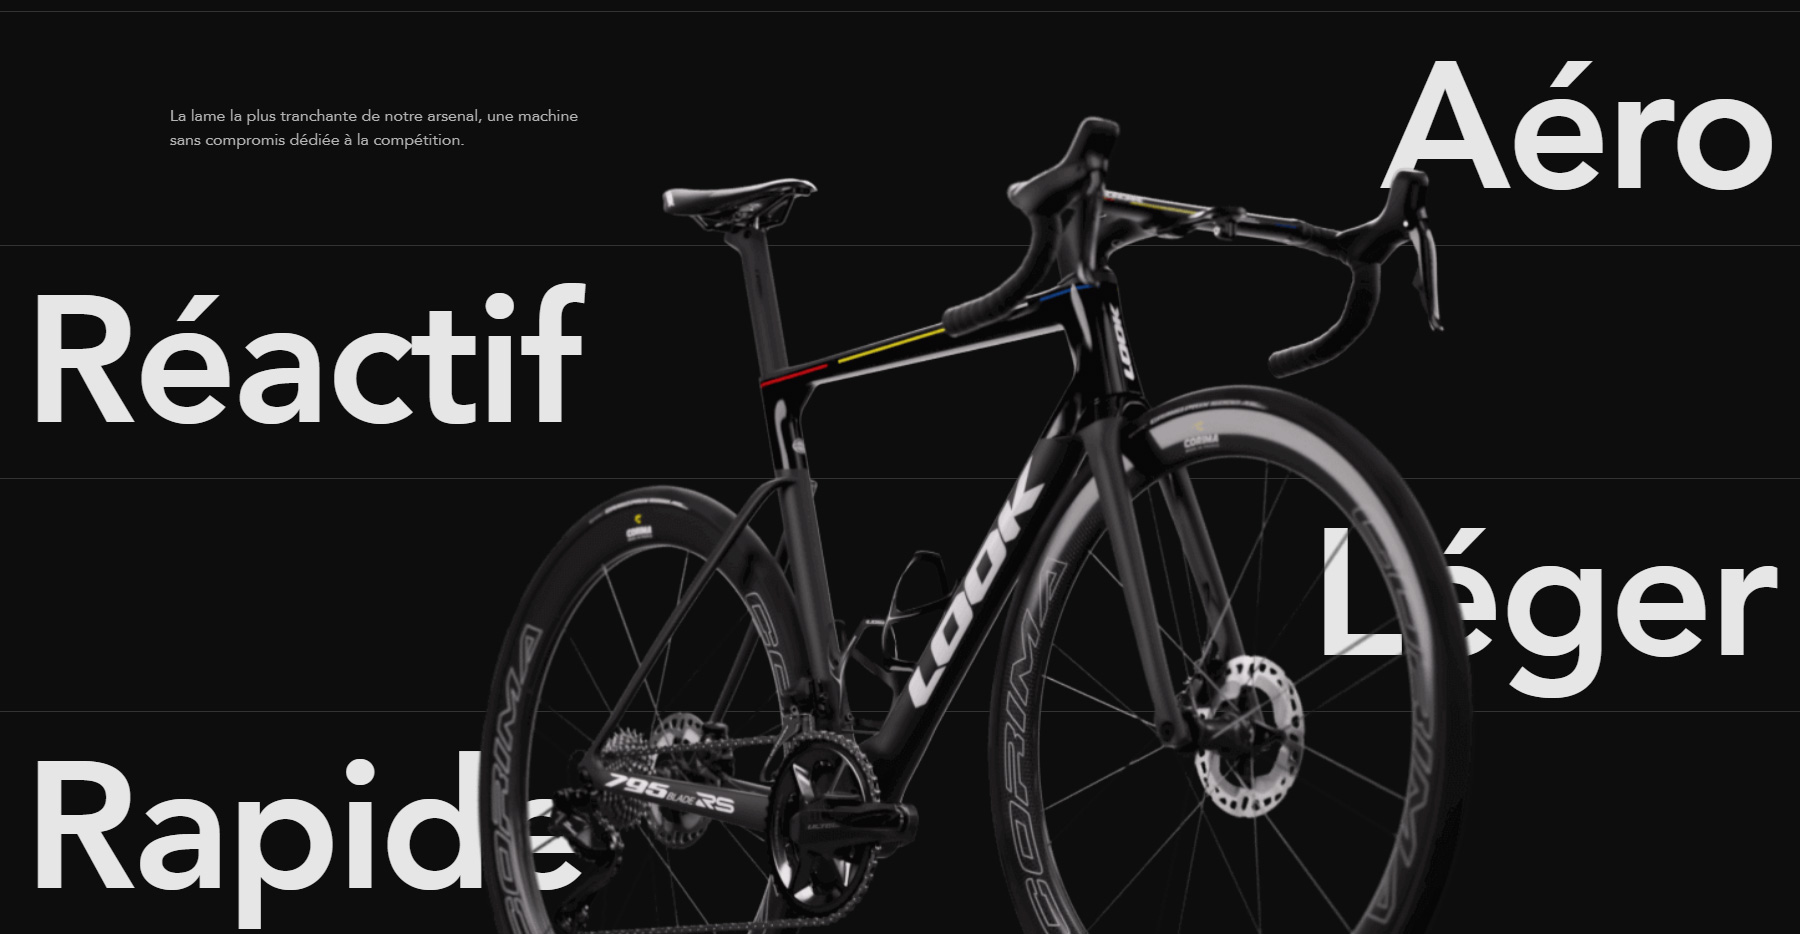 Look 795 Blade RS - Website of the Day